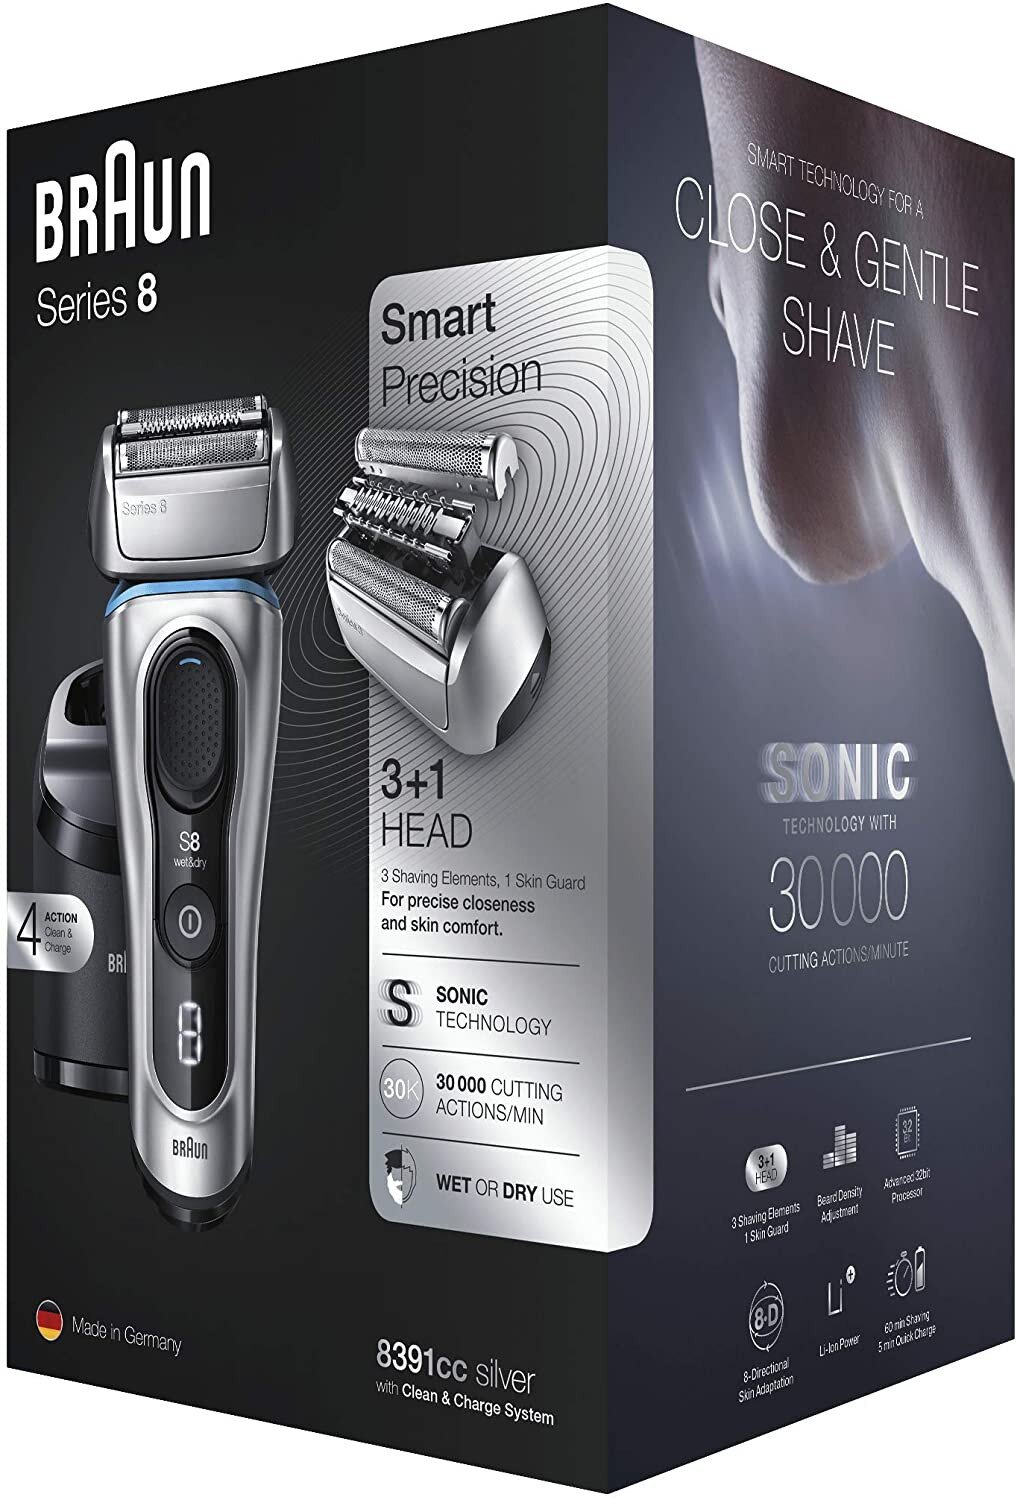 Braun Series 8 battery shaver collection